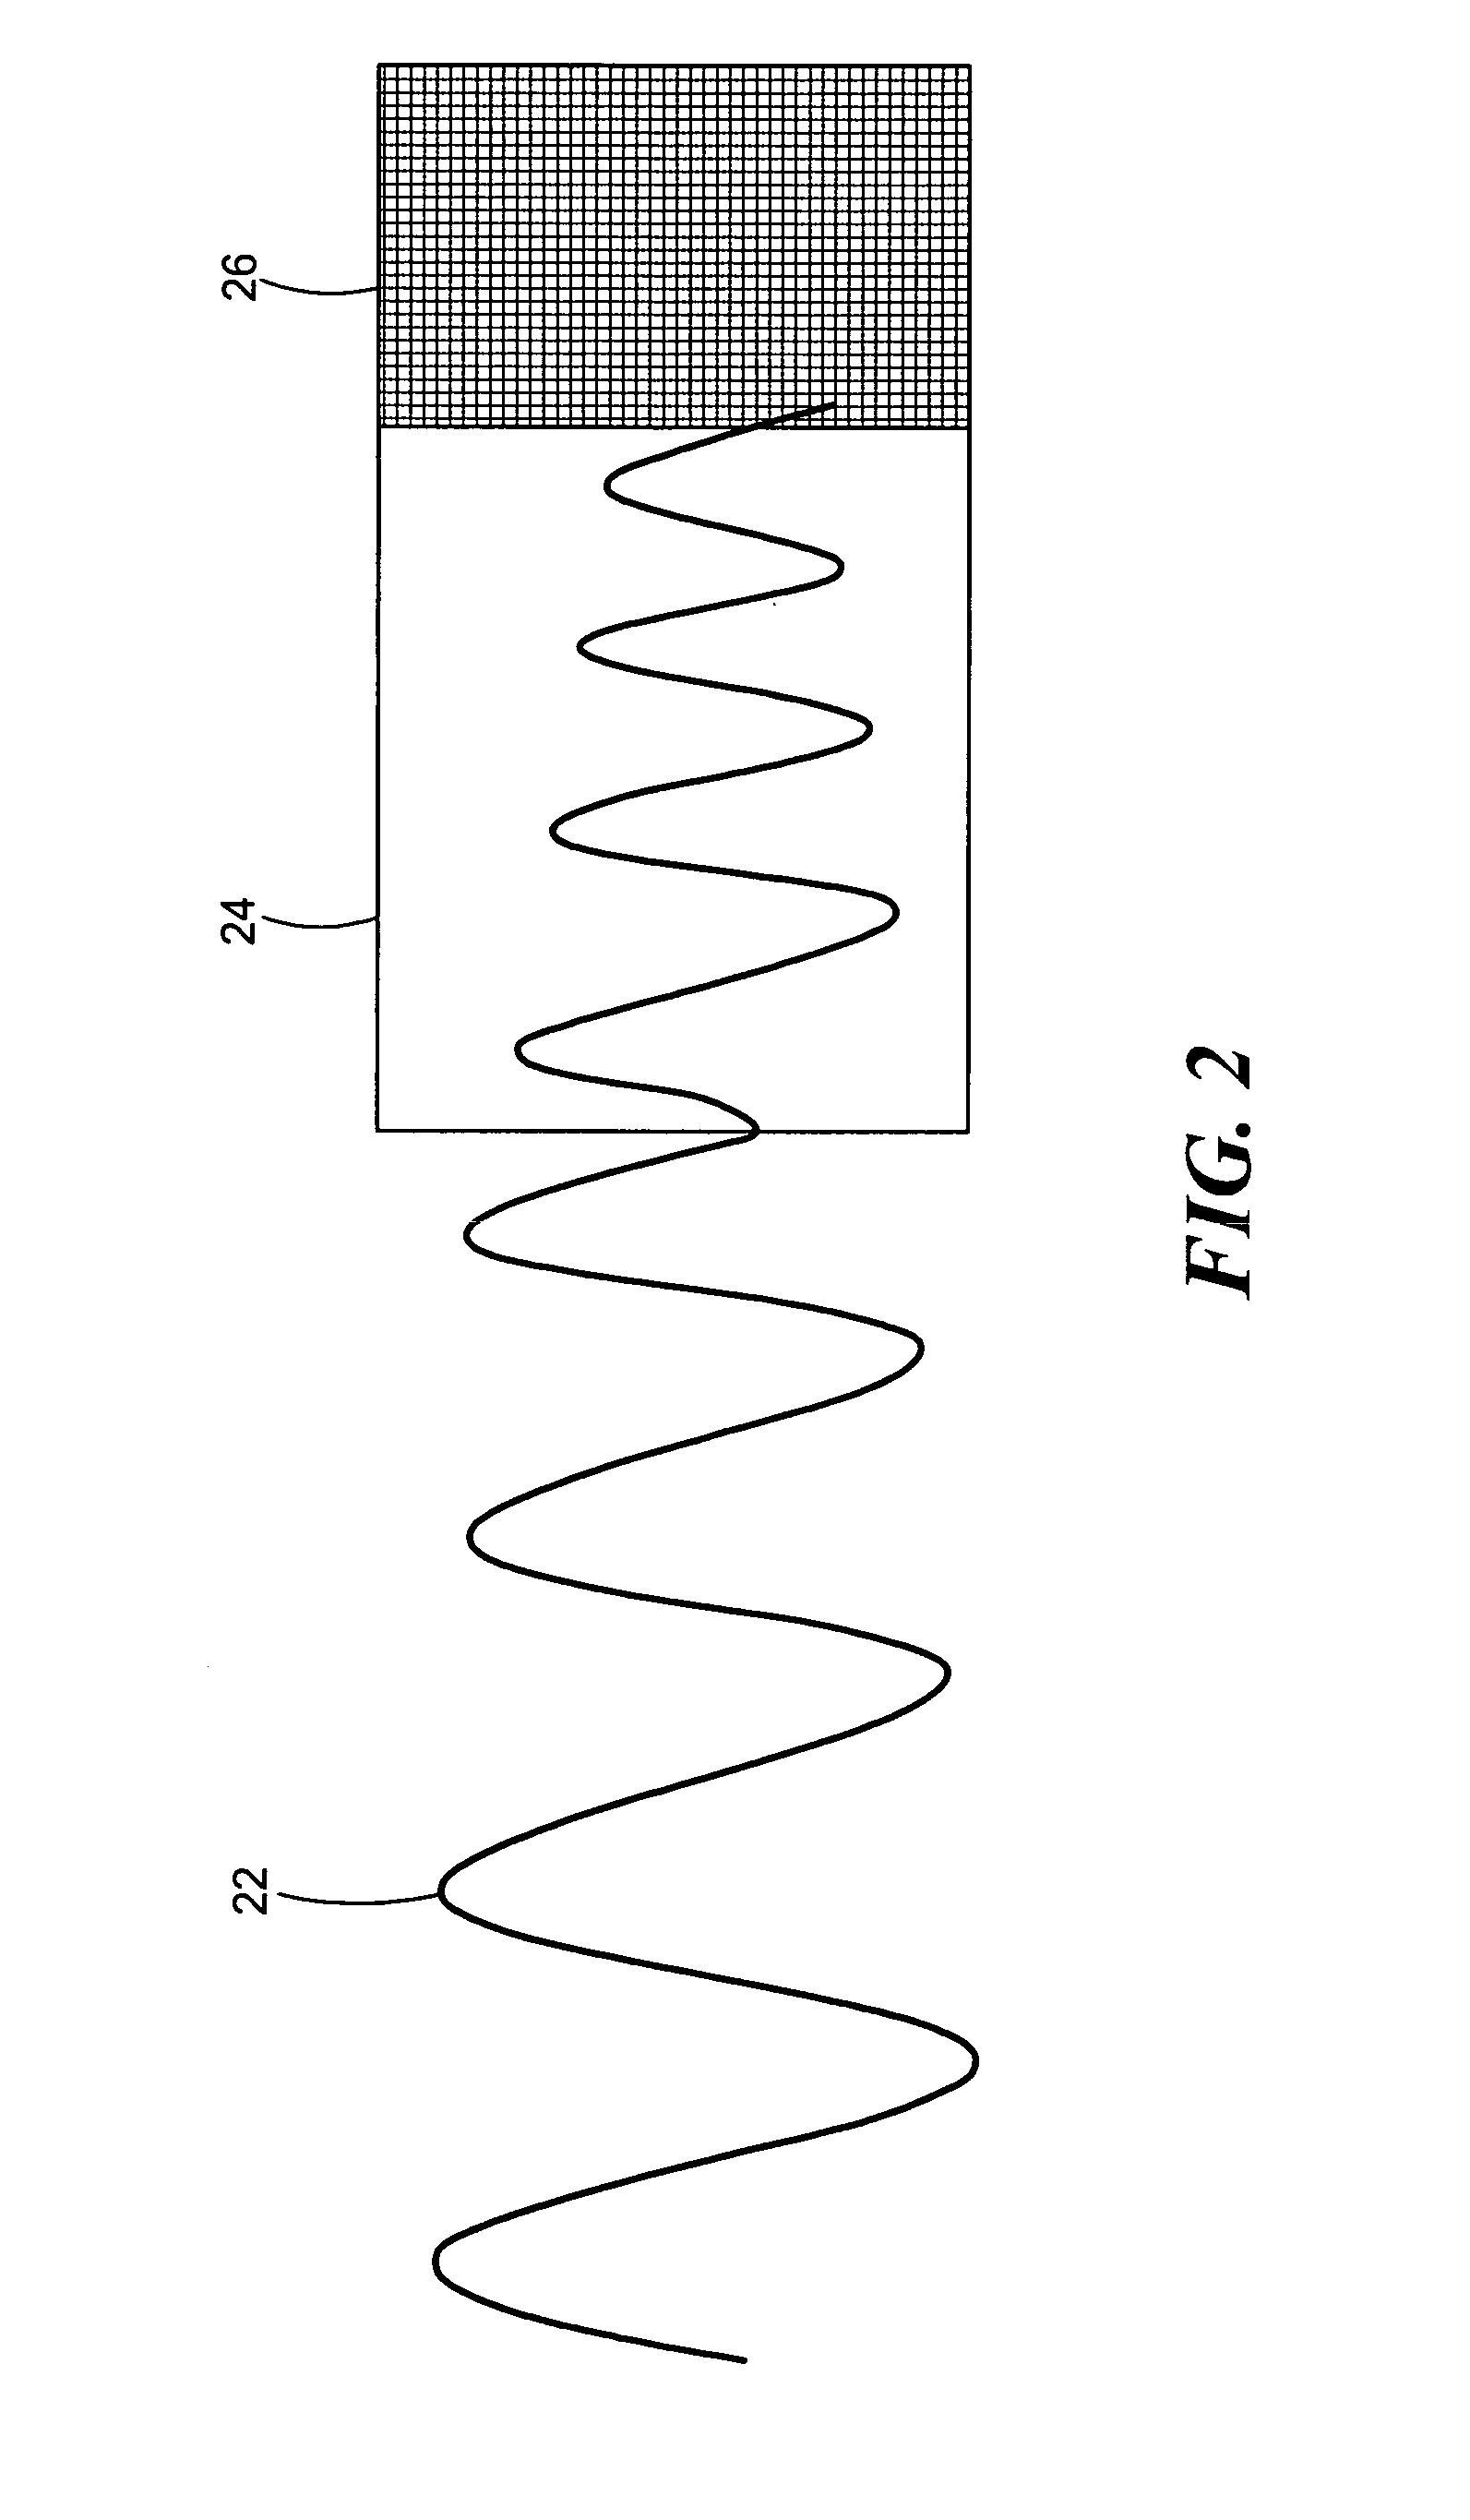 Microwave hybrid and plasma rapid thermal processing of semiconductor wafers